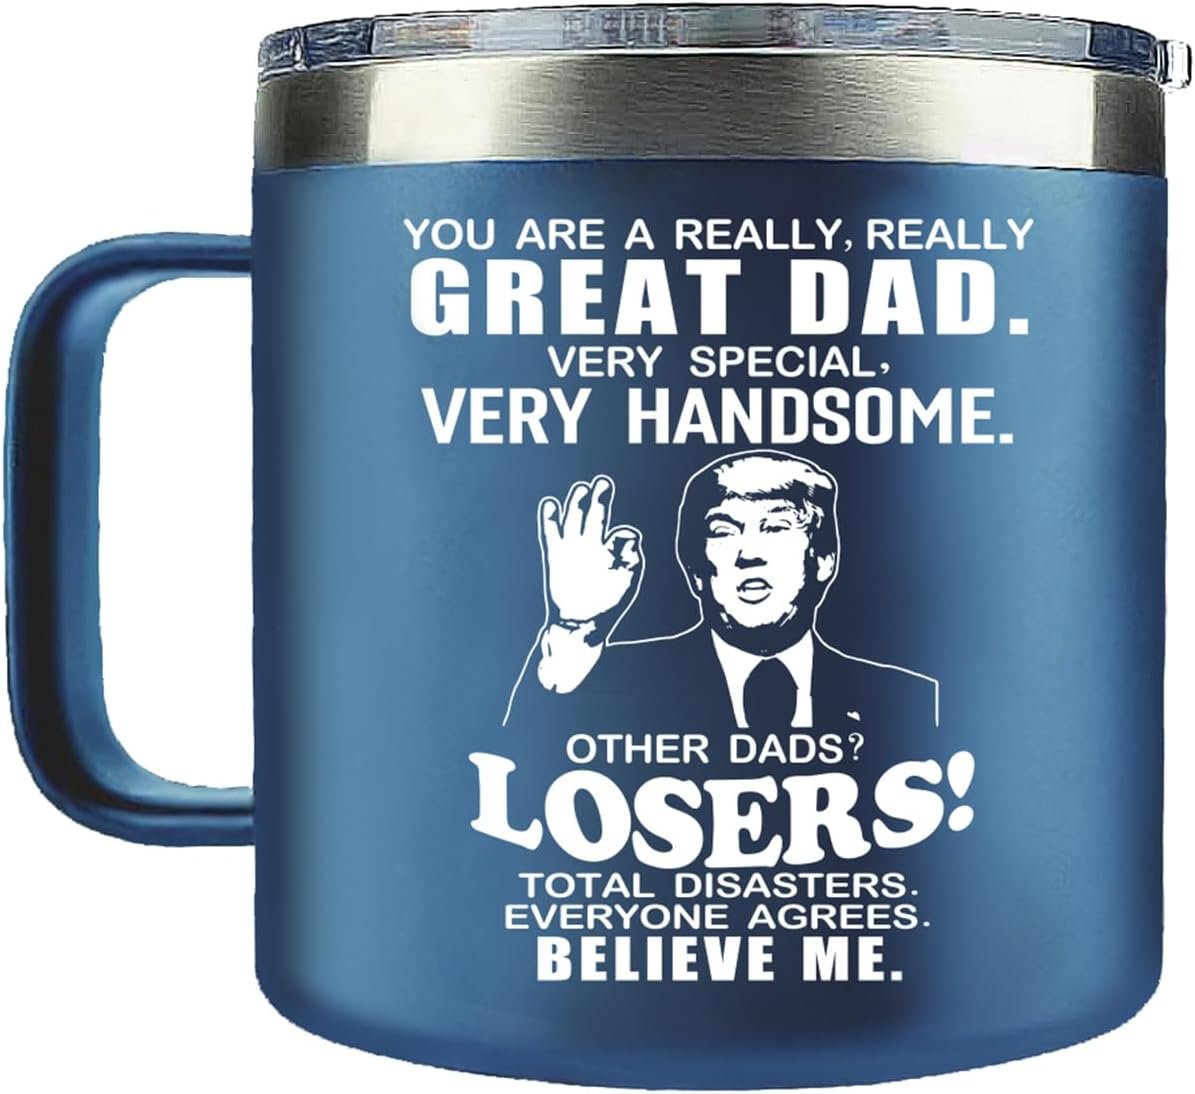 Fathers Day Dad Gifts from Daughter Son,Dad Gifts,Fathers Day Birthday Gifts for Dad Step Dad Father in Law Him Bonus Dad Daddy,Gift for Men Papa Grandpa Uncle Stepdad,14 oz Blue Tumbler Mug